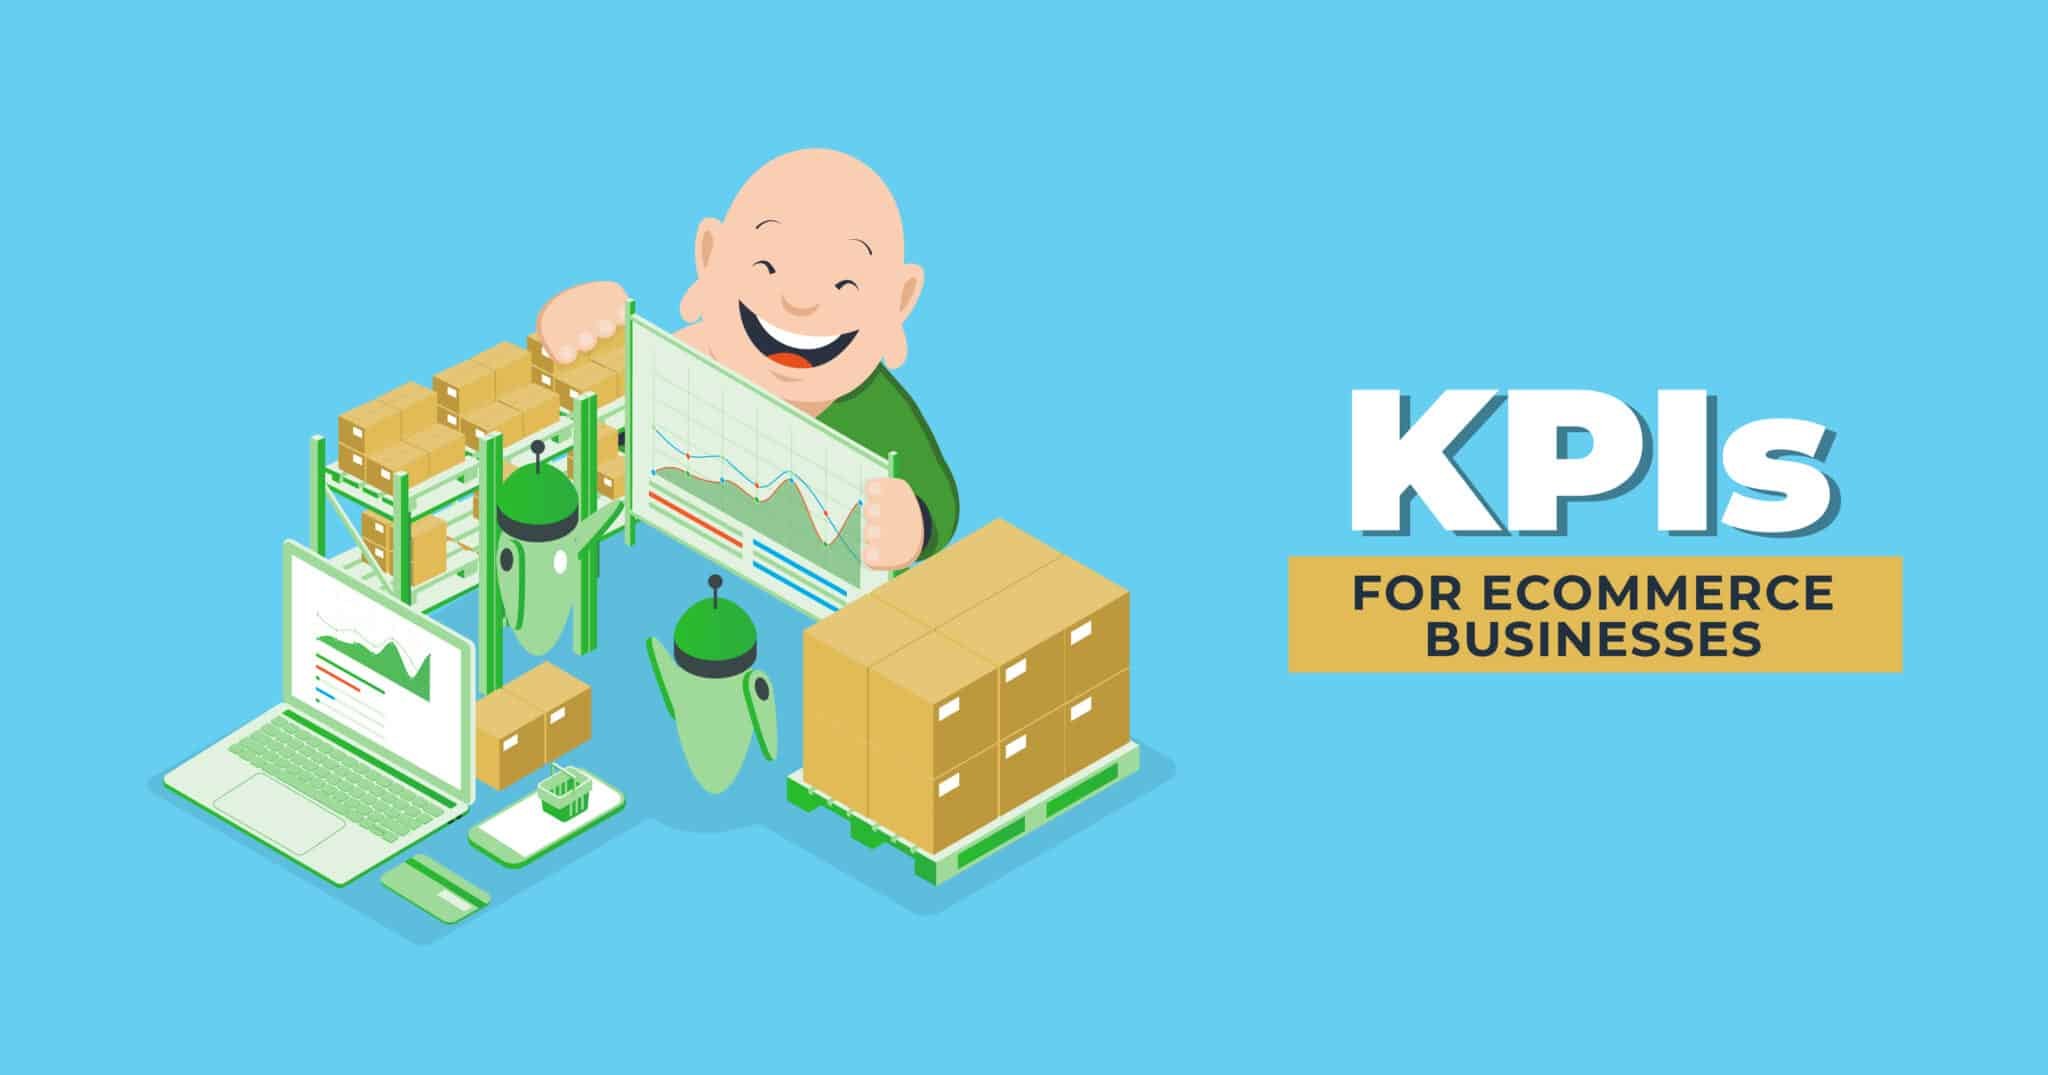 KPIs for Ecommerce Businesses